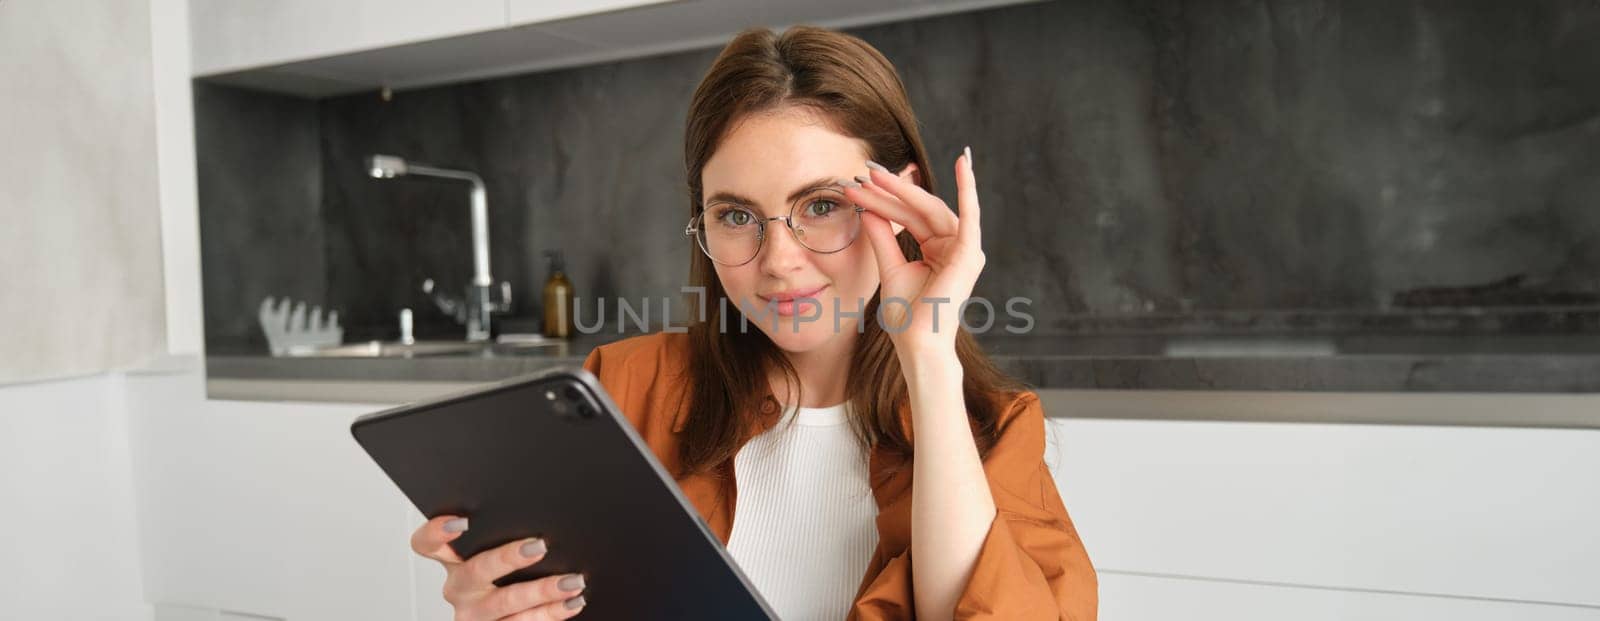 Portrait of beautiful young female model in glasses, holding digital tablet, wearing glasses, reading e-book, posing in kitchen at home.